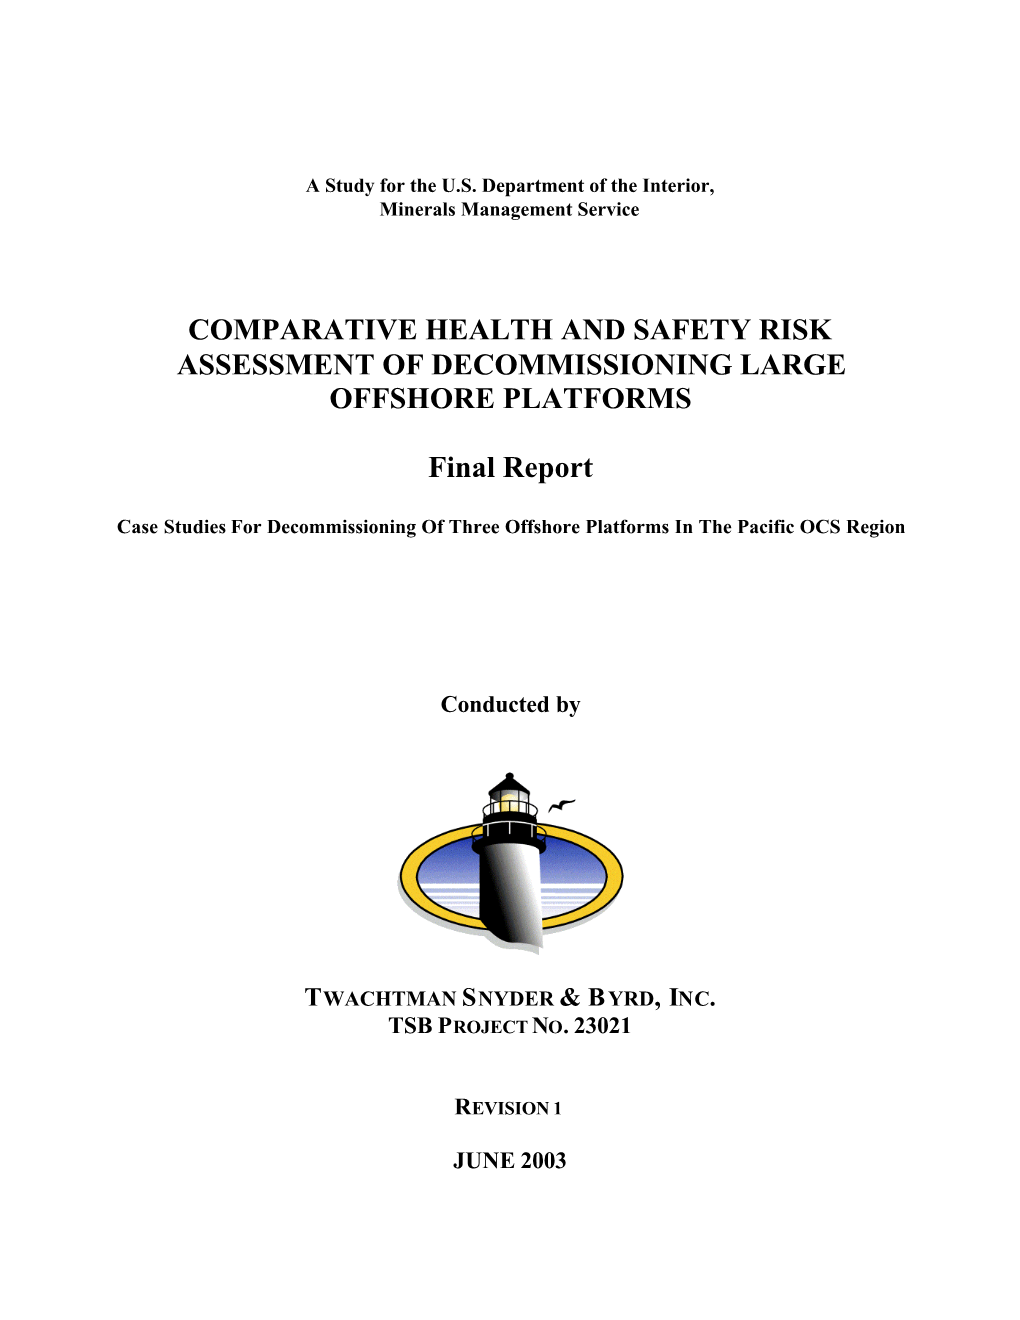 Comparative Health and Safety Risk Assessment of Decommissioning Large Offshore Platforms